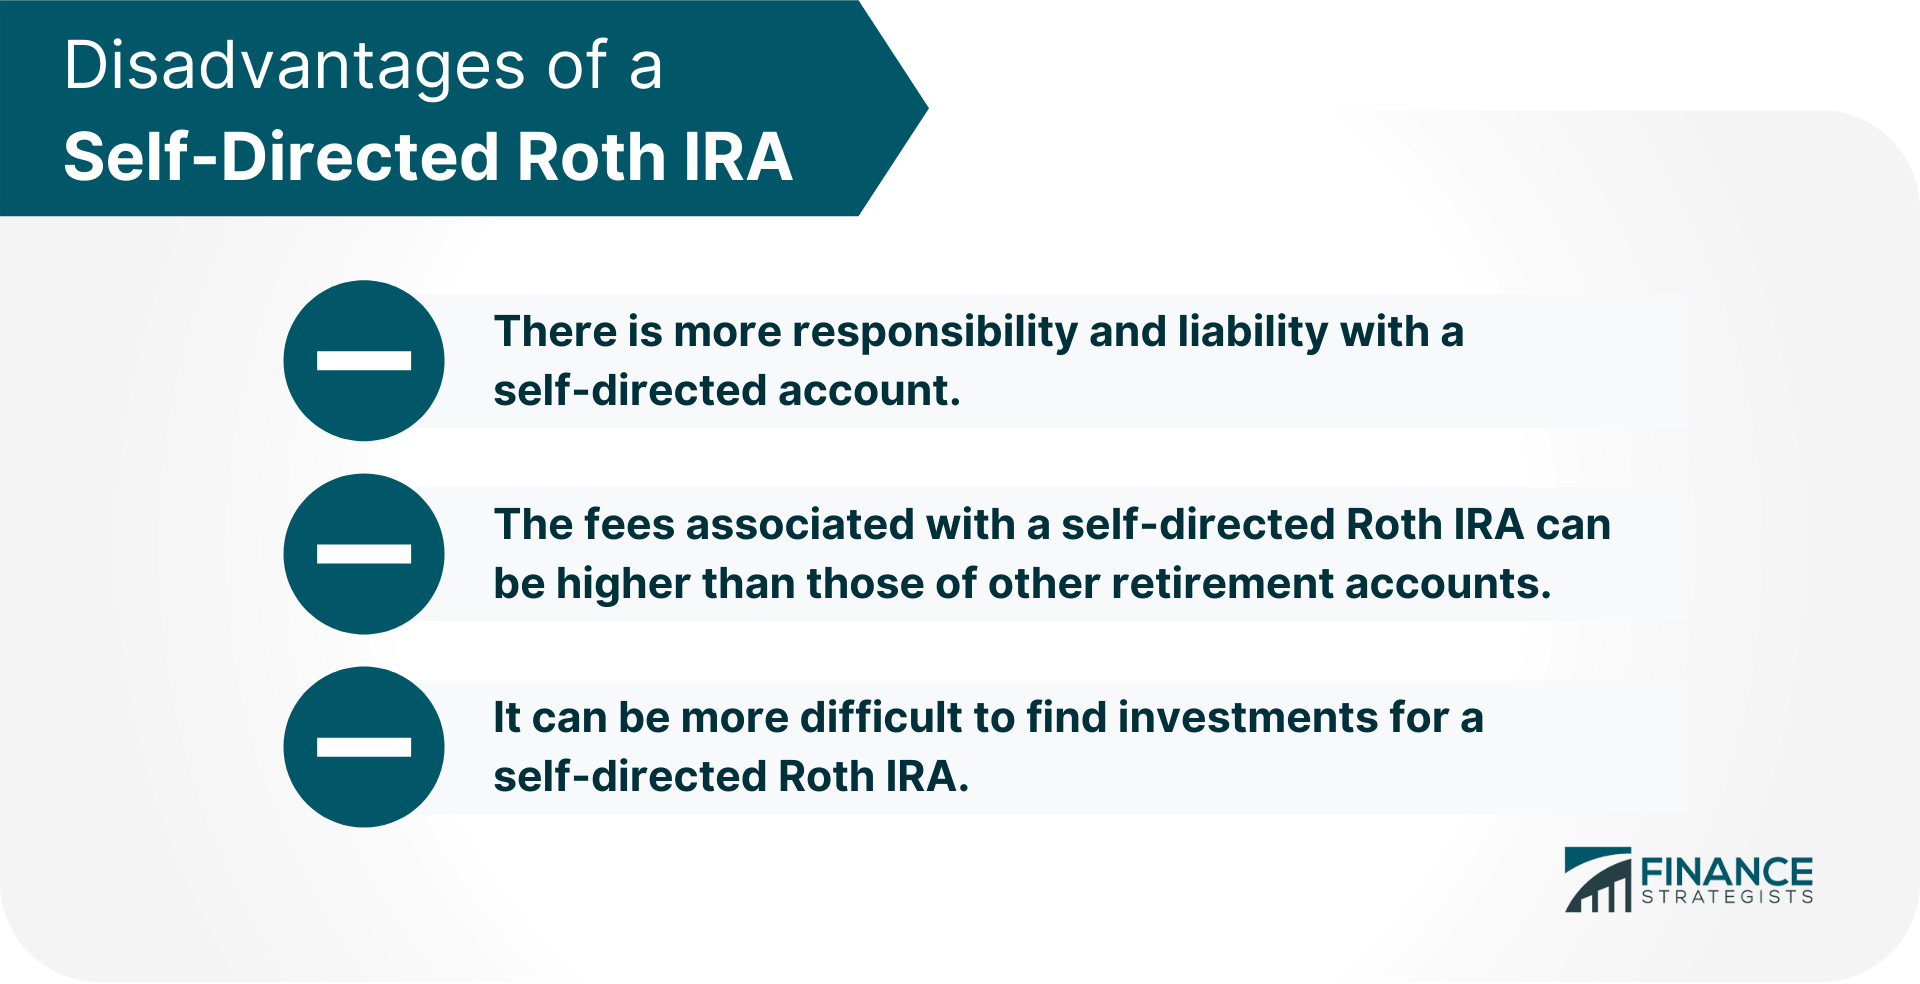 Disadvantages_of_a_Self-Directed_Roth_IRA